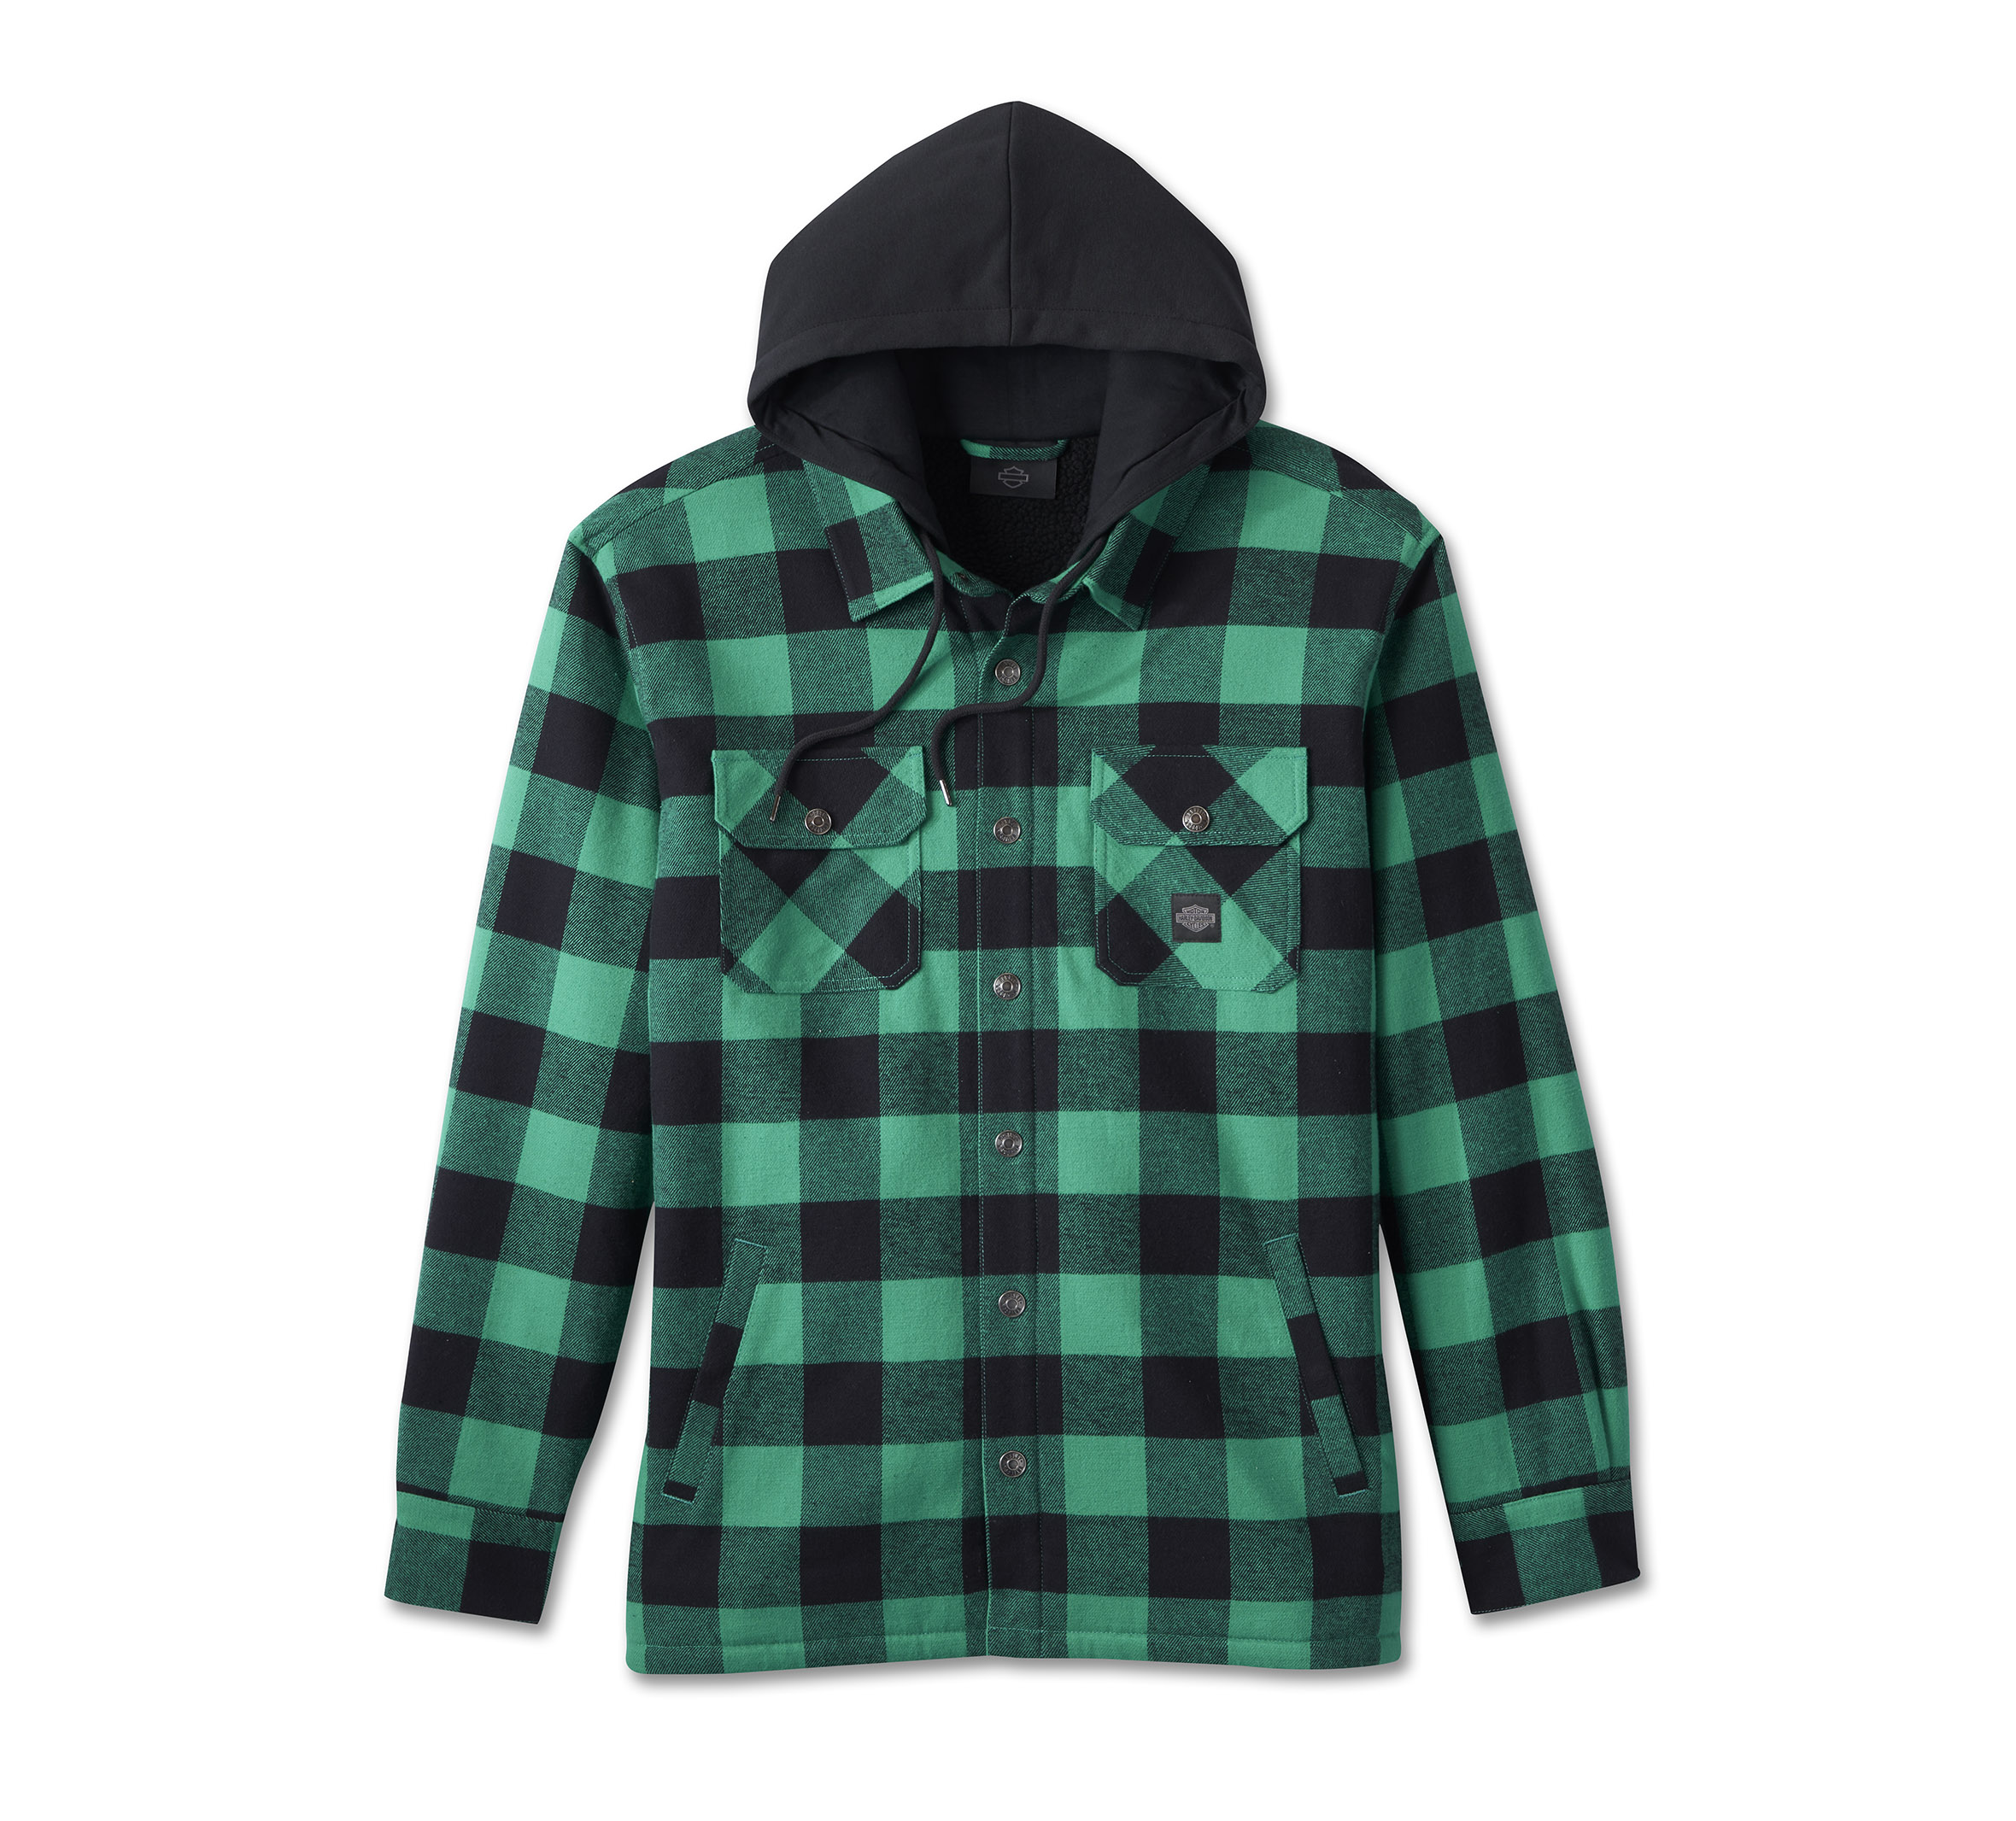 Men's Casual Green Flannel Plaid Hooded Jacket, Drawstrings